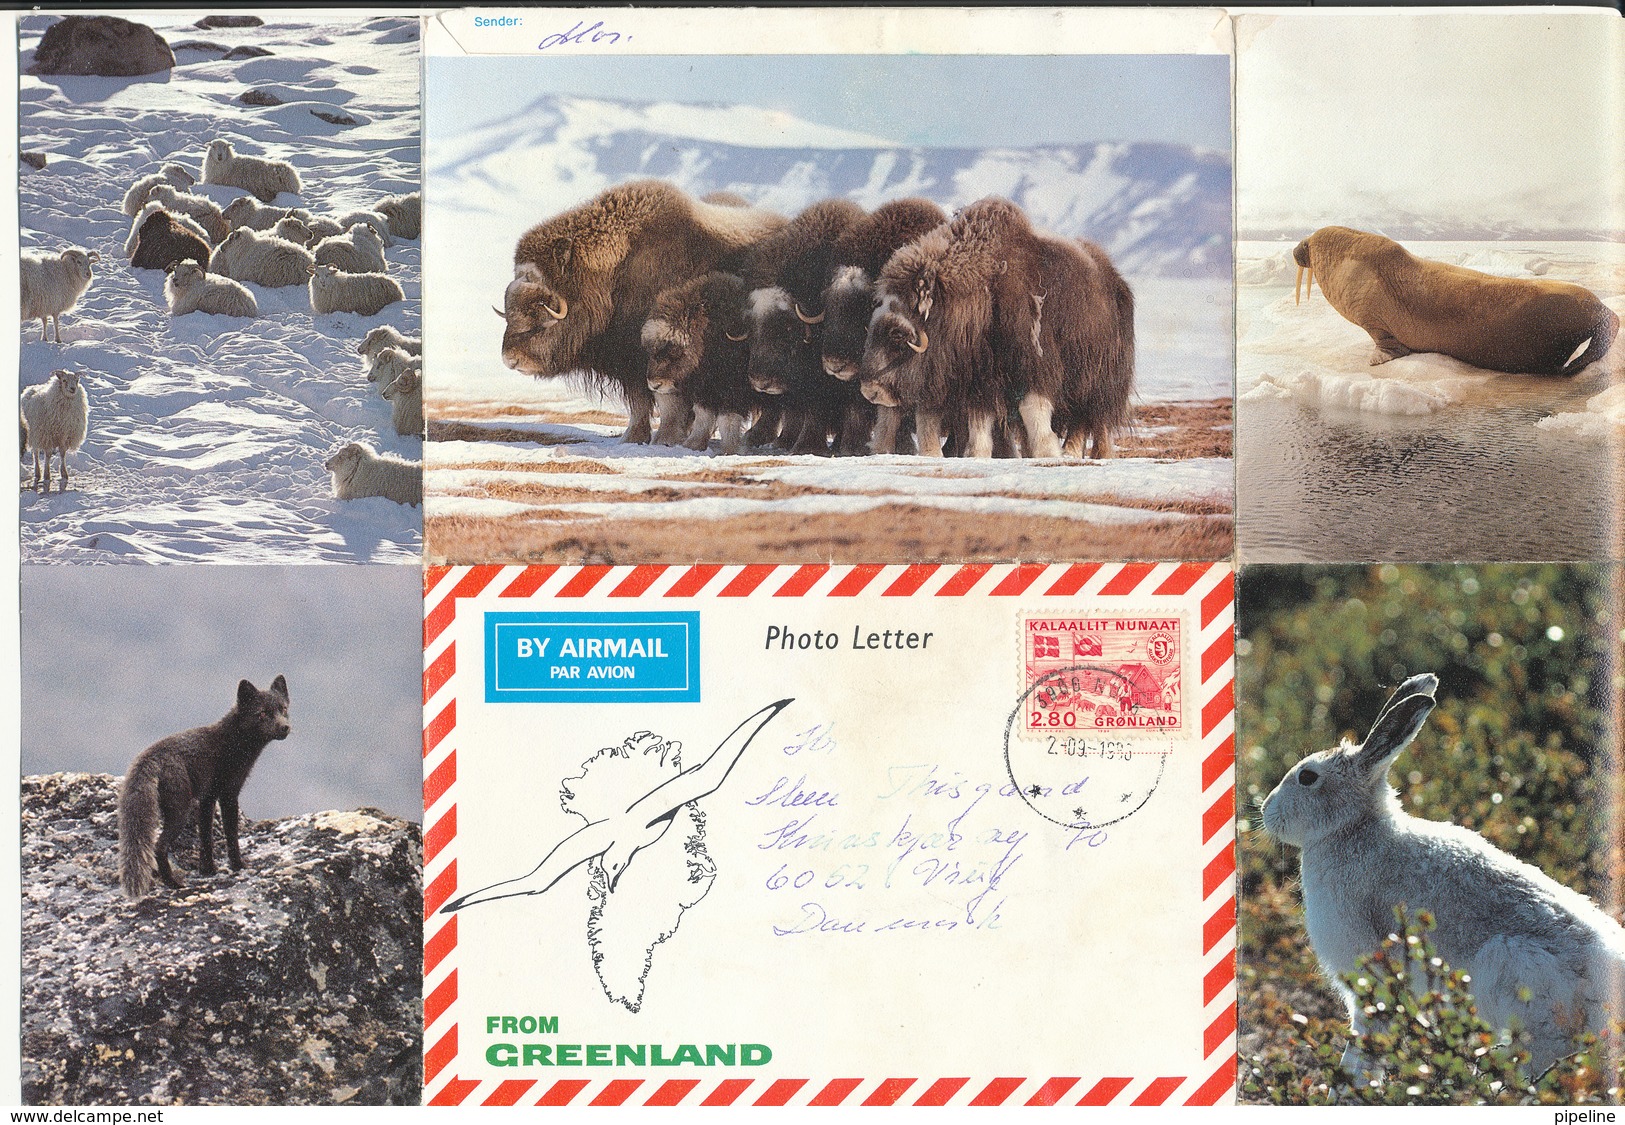 Greenland Photoletter Sent To Denmark Nuuk 2-9-1986 - Covers & Documents